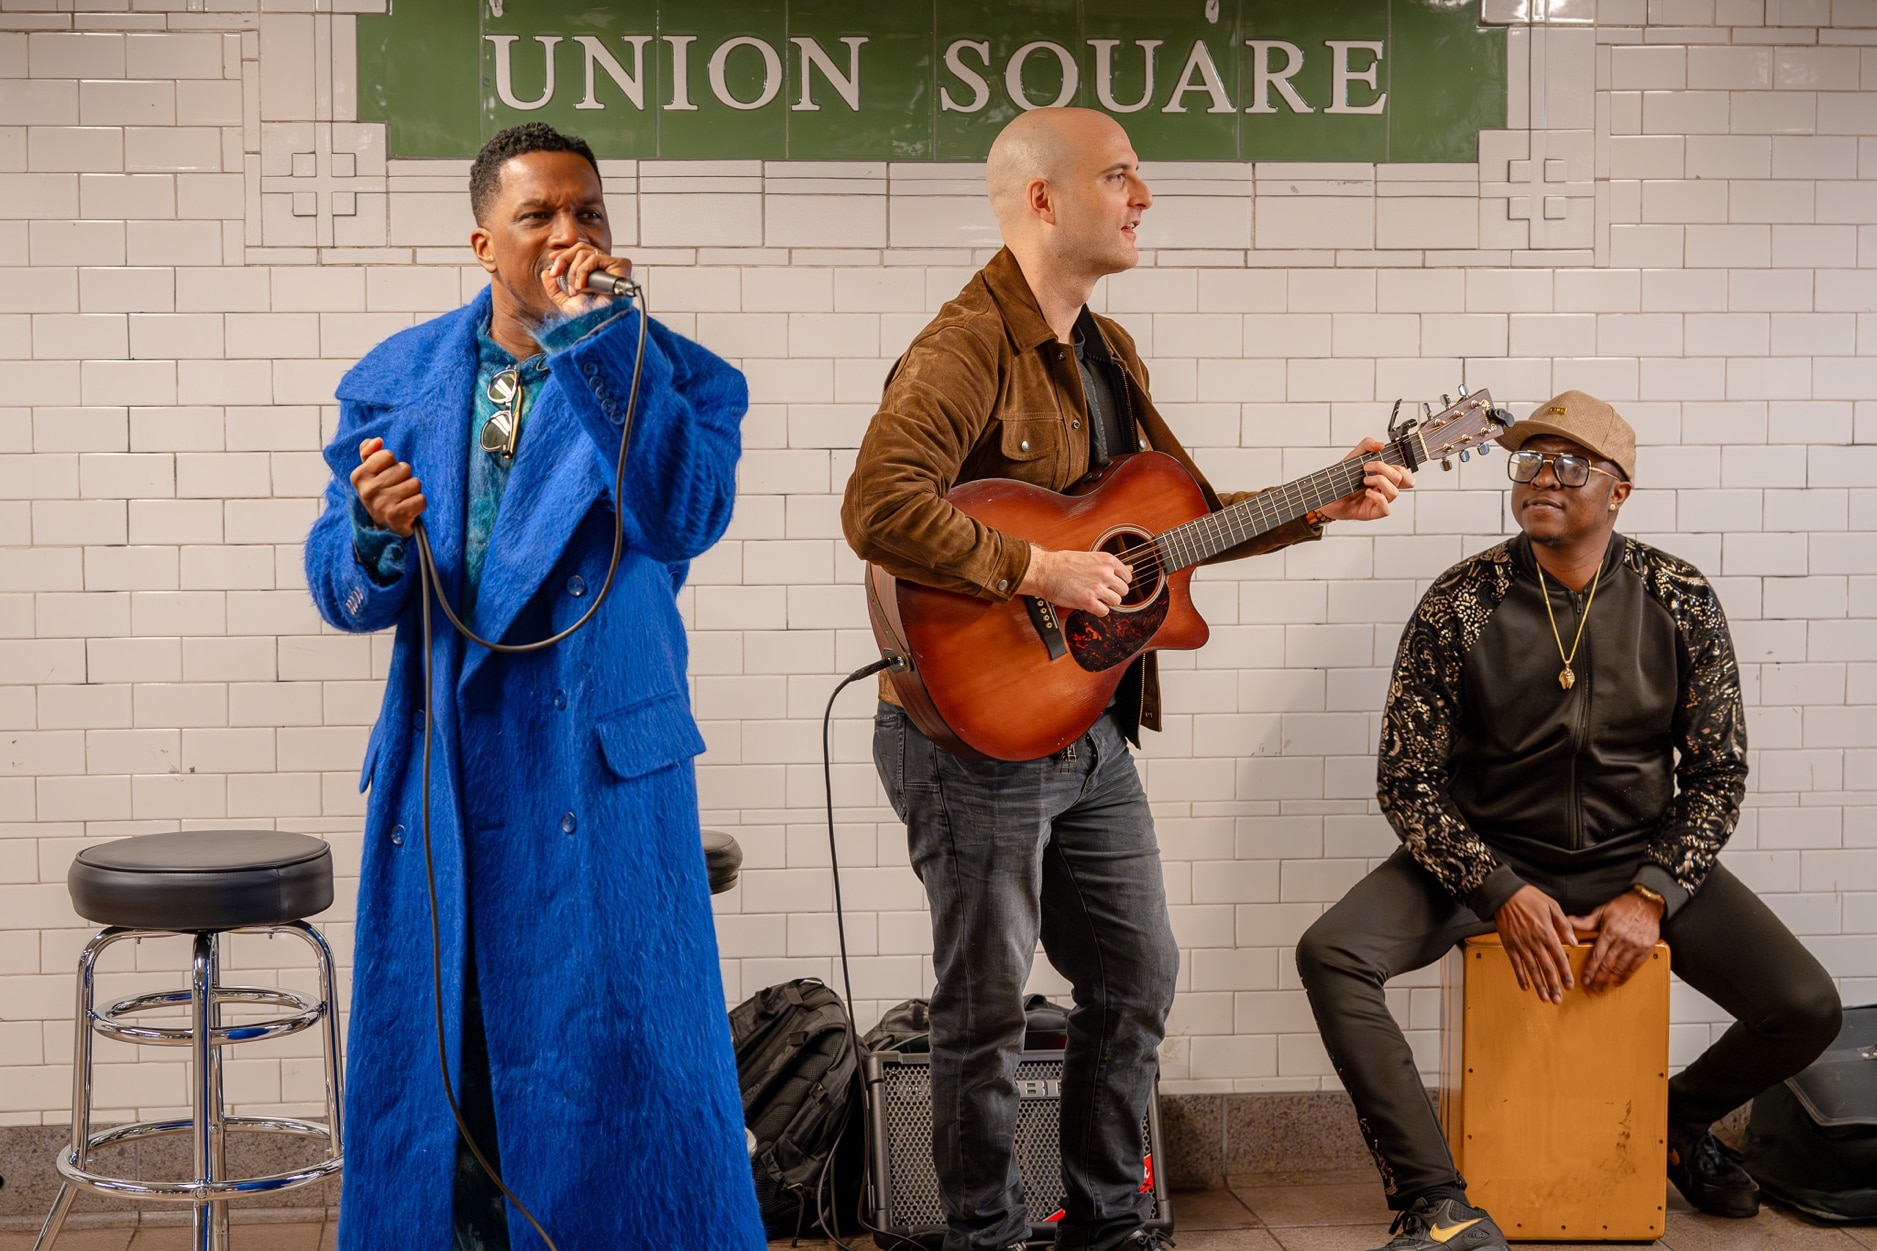 Leslie Odom Jr., wearing a bright blue coat, sings as a guitarist and drummer play behind him at the Union Square subway station, with the Union Square tile sign behind them